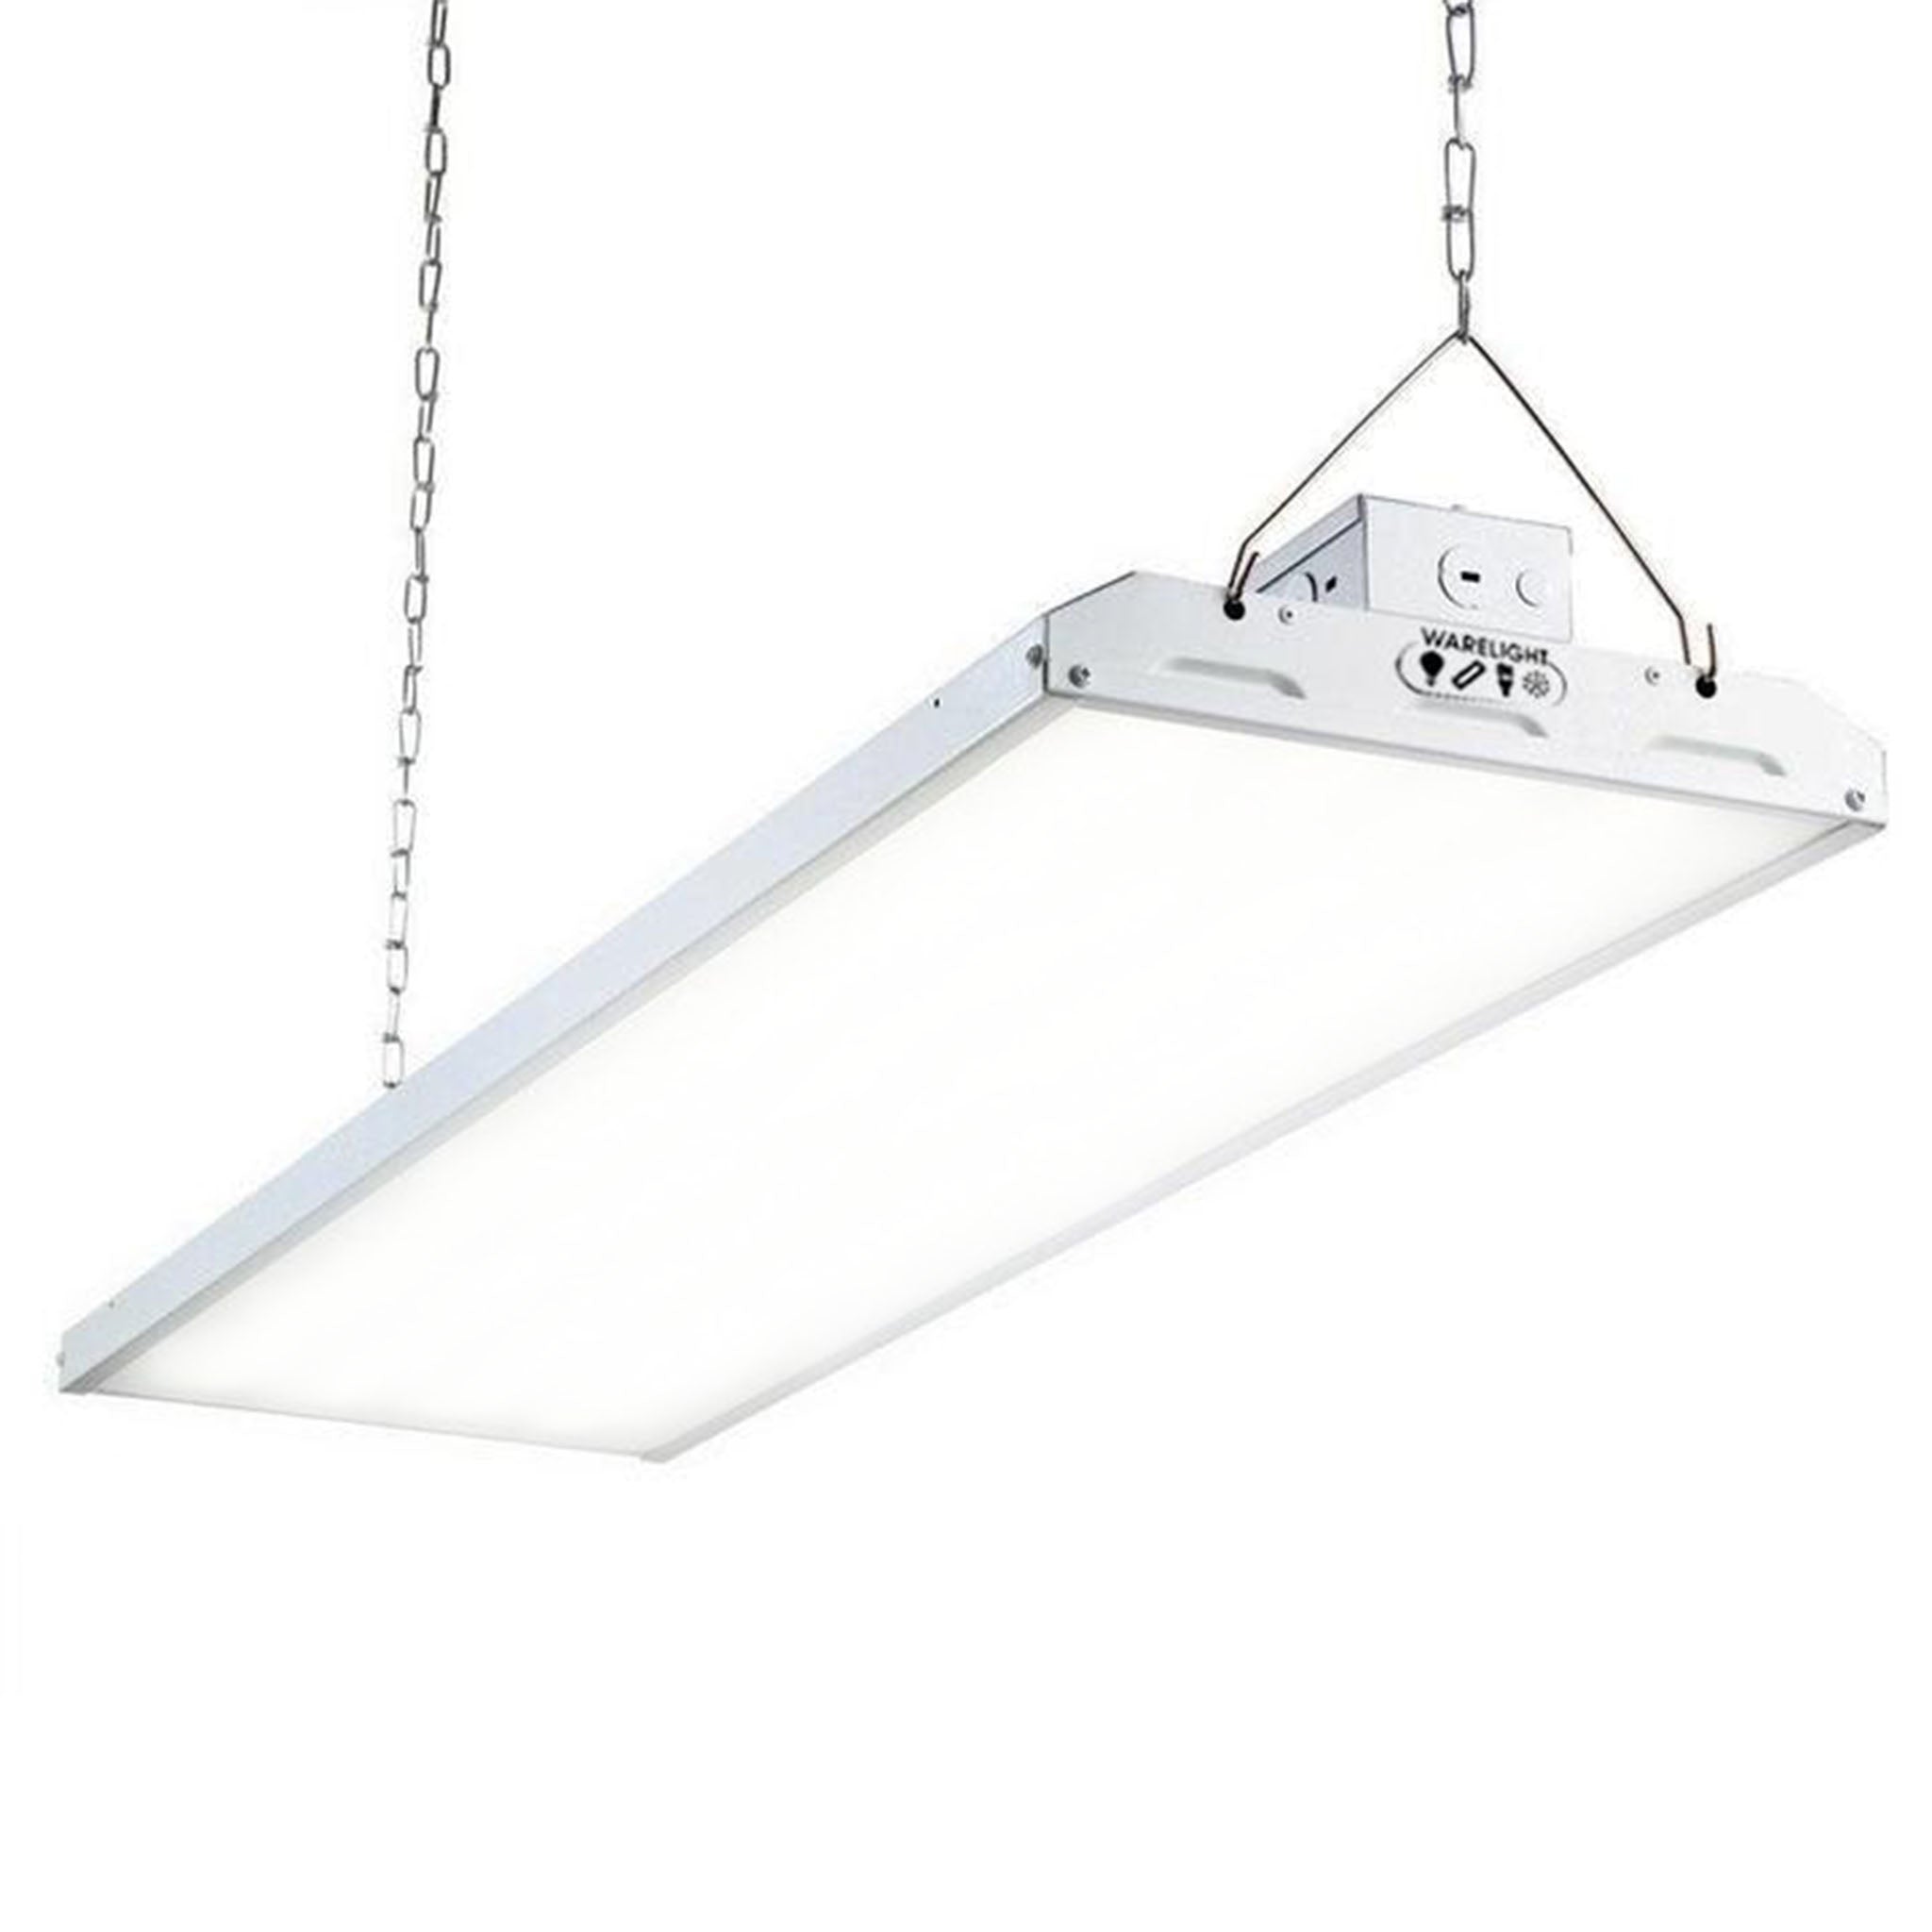 2-Foot Hanging Chain and V-Clips for High Bay Fluorescent